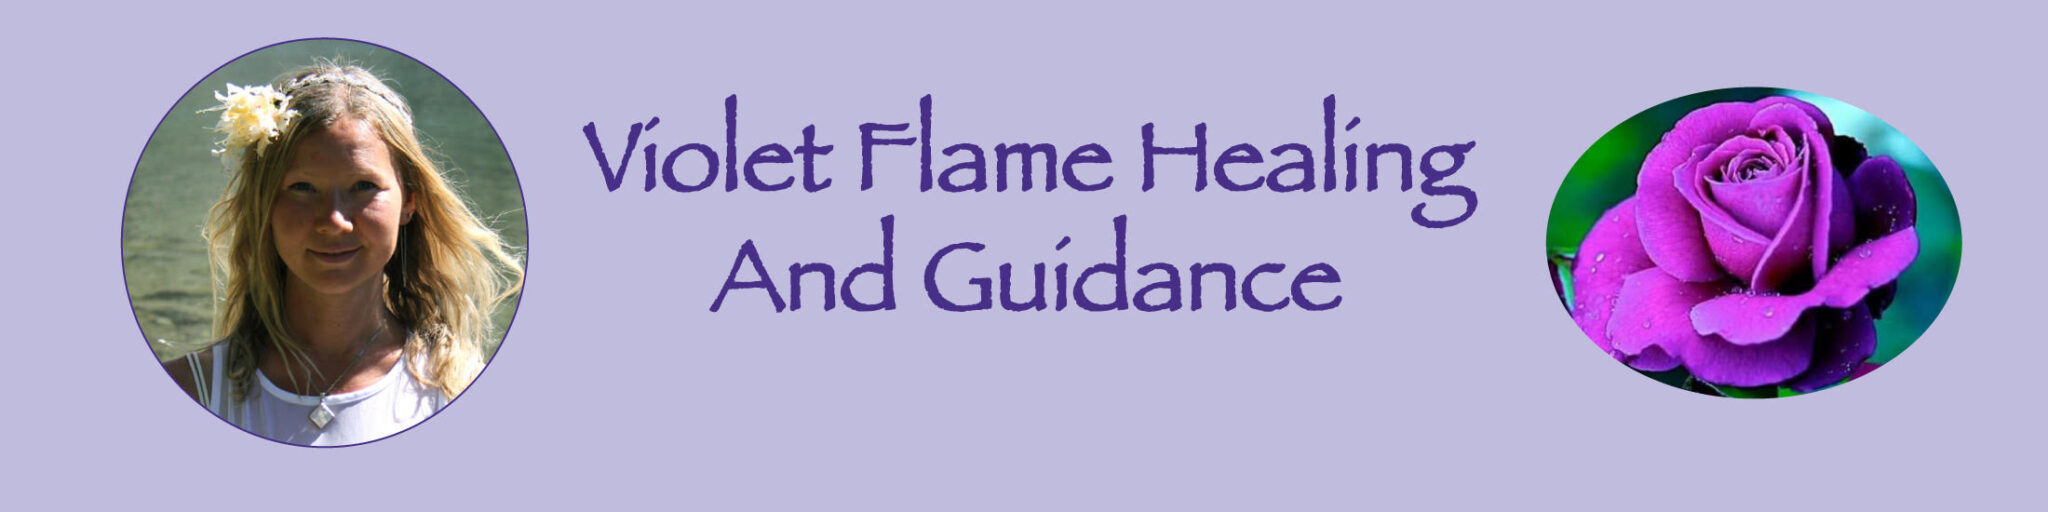 Violet Flame Healing & Guidance - Lightworker, Healer, Guide | I offer energy healing, intuitive guidance, regression hypnosis, twin flames support and guided sacred nature hikes